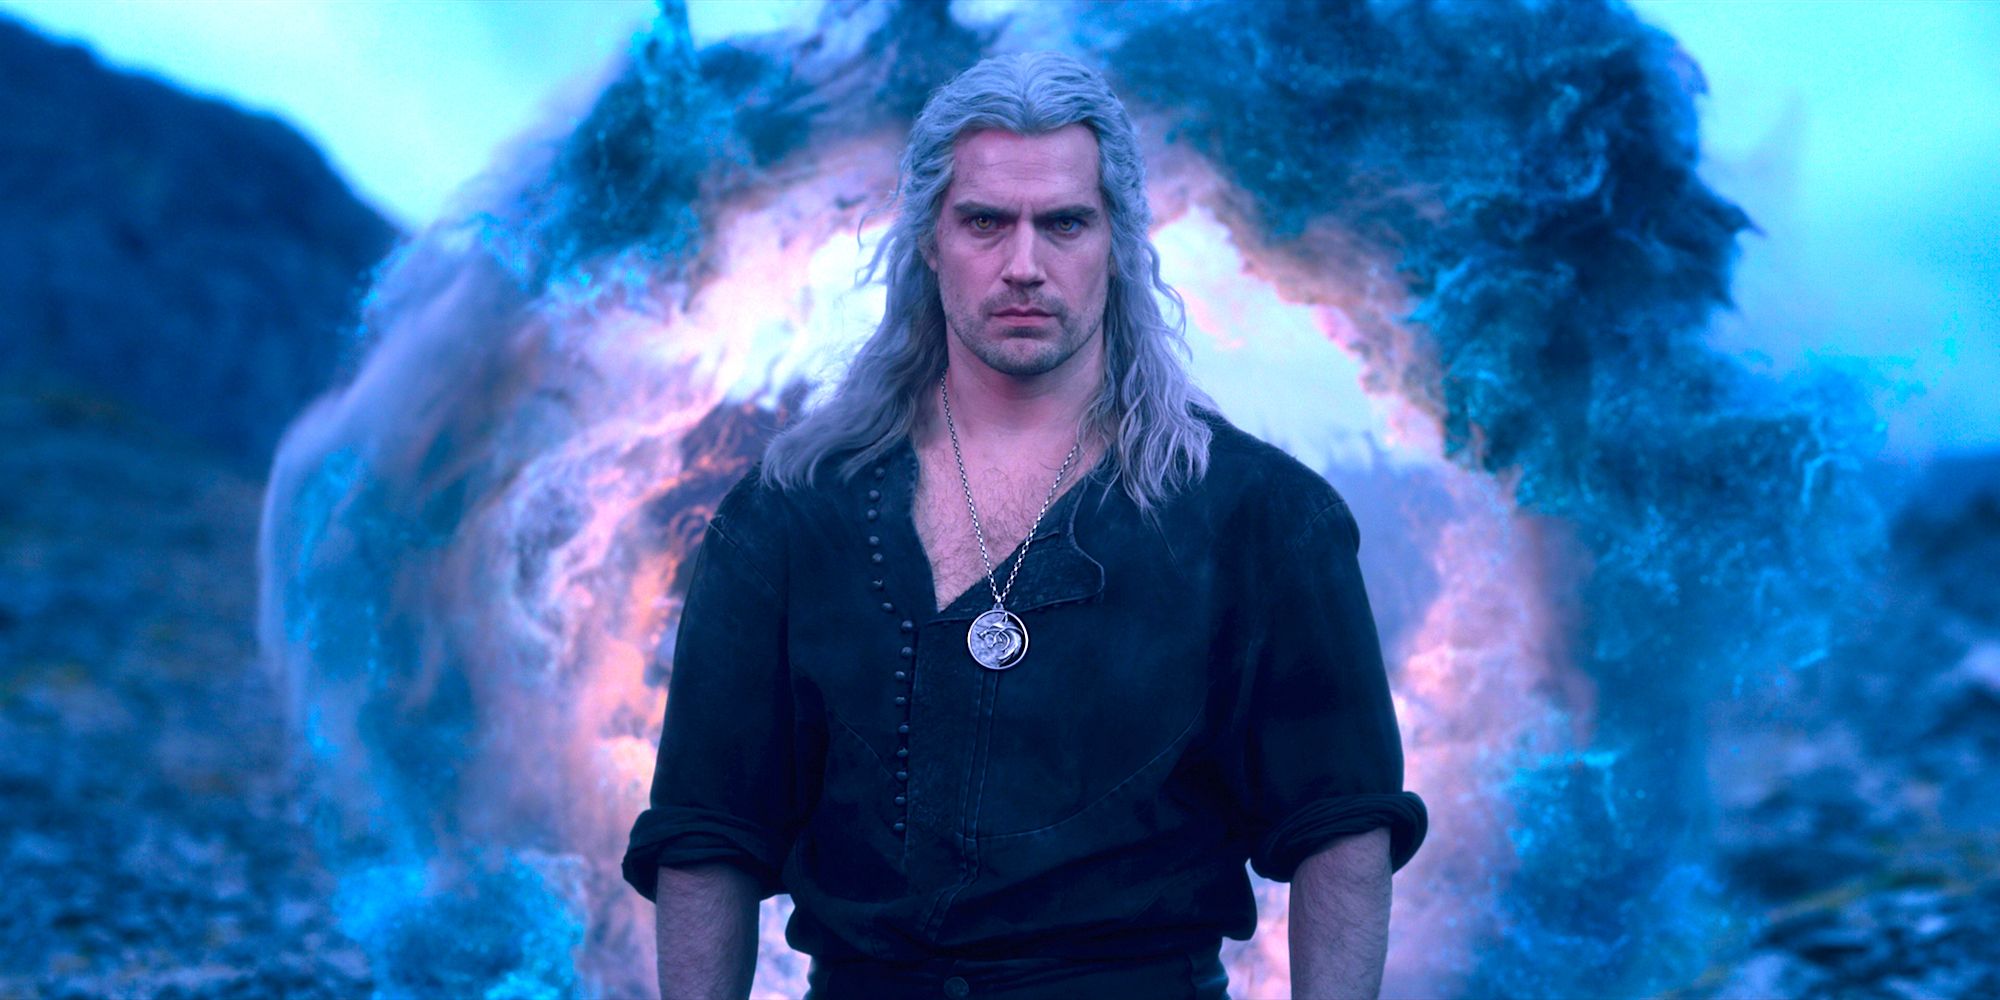 How Liam Hemsworth's Geralt Look Compares To Henry Cavill In The Witcher Season 4